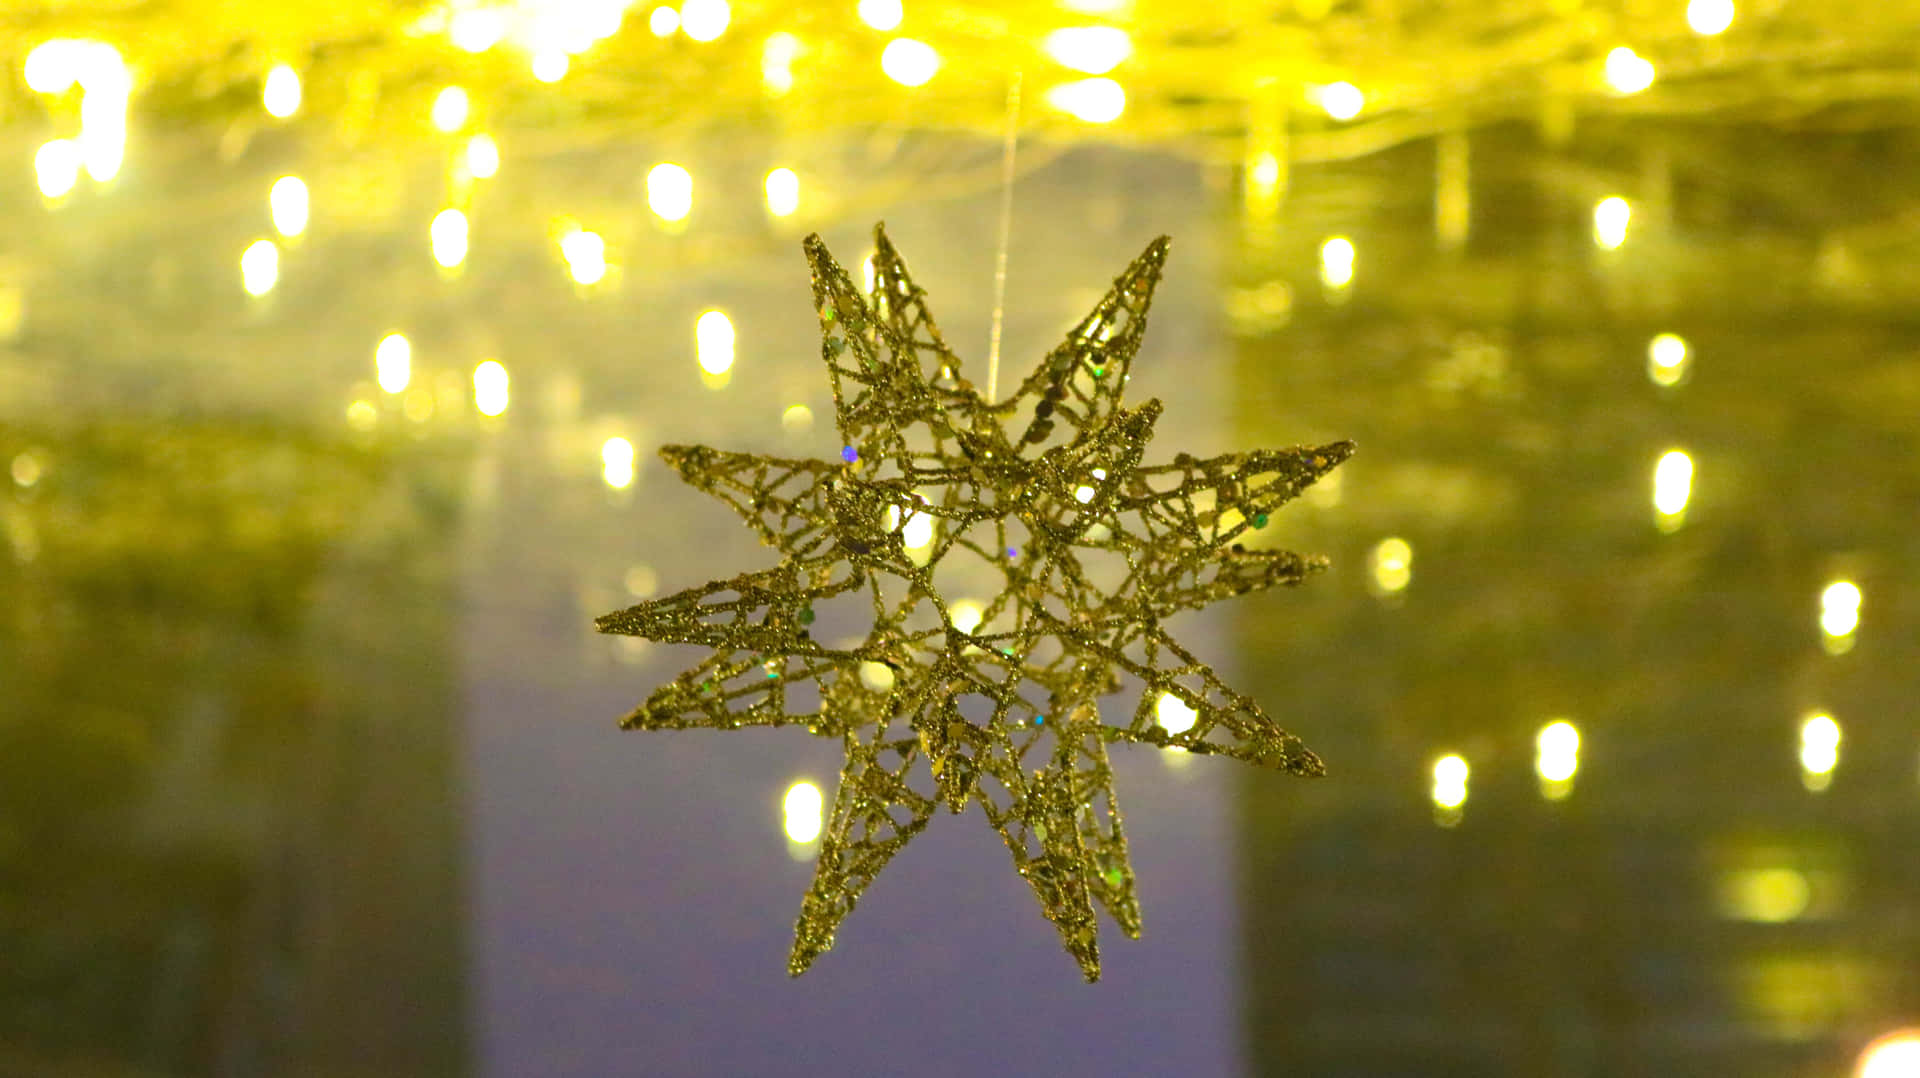 A Star Decoration Hanging From A Light Fixture